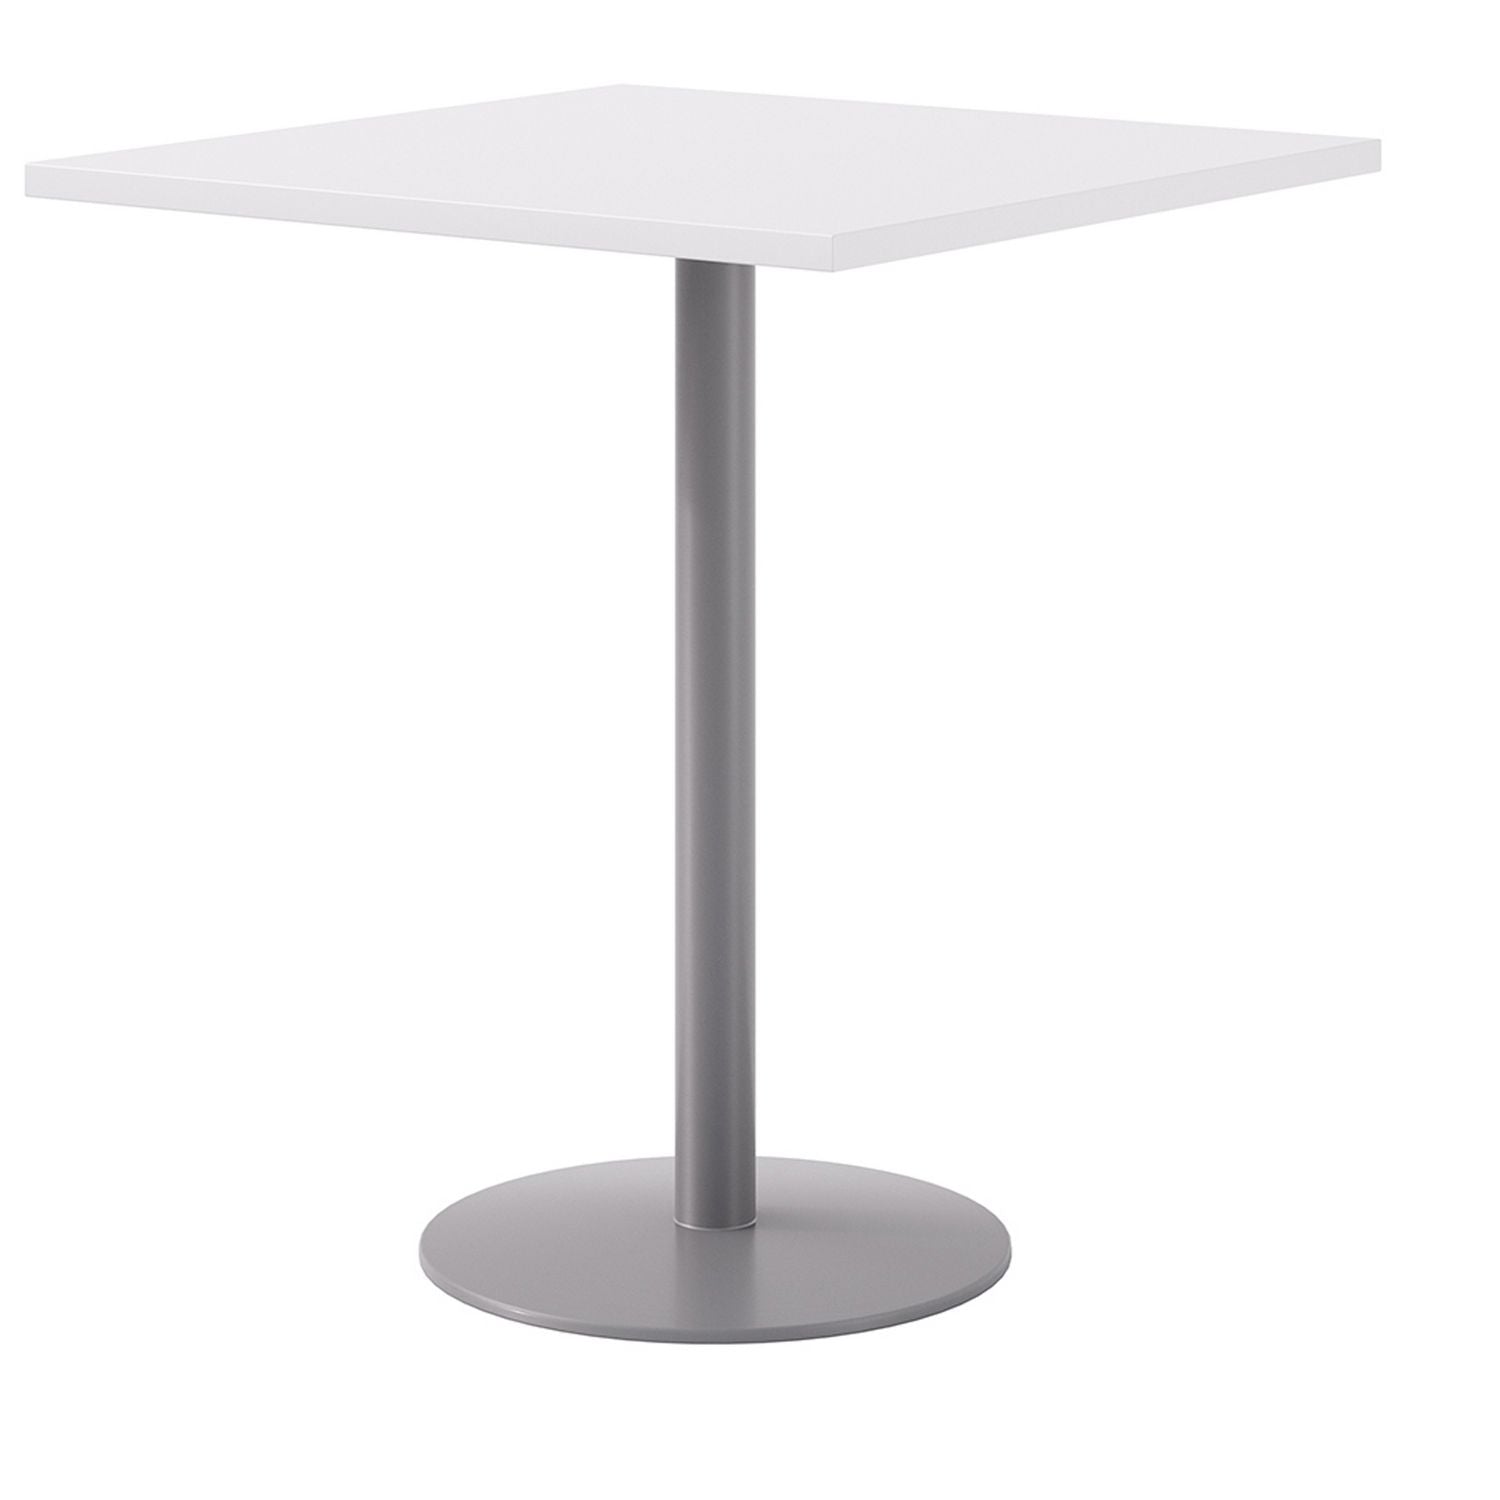 pedestal-bistro-table-with-four-espresso-jive-series-barstools-square-36x36x41-designer-white-ships-in-4-6-business-days_kfi811774039901 - 2